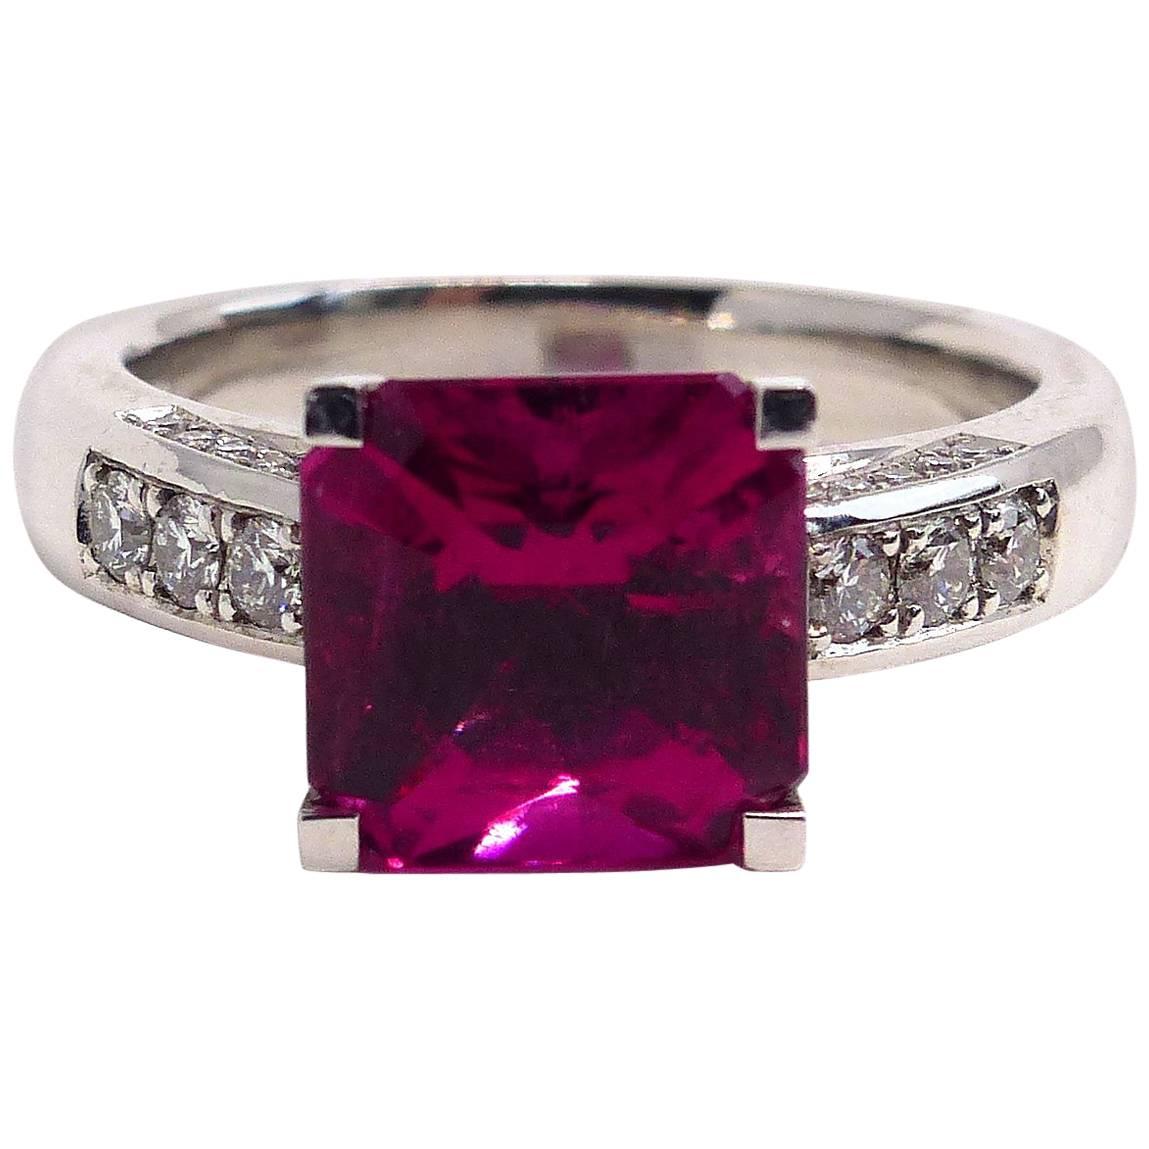 Ring in Rose Gold with 1 Rubellite and Diamonds.